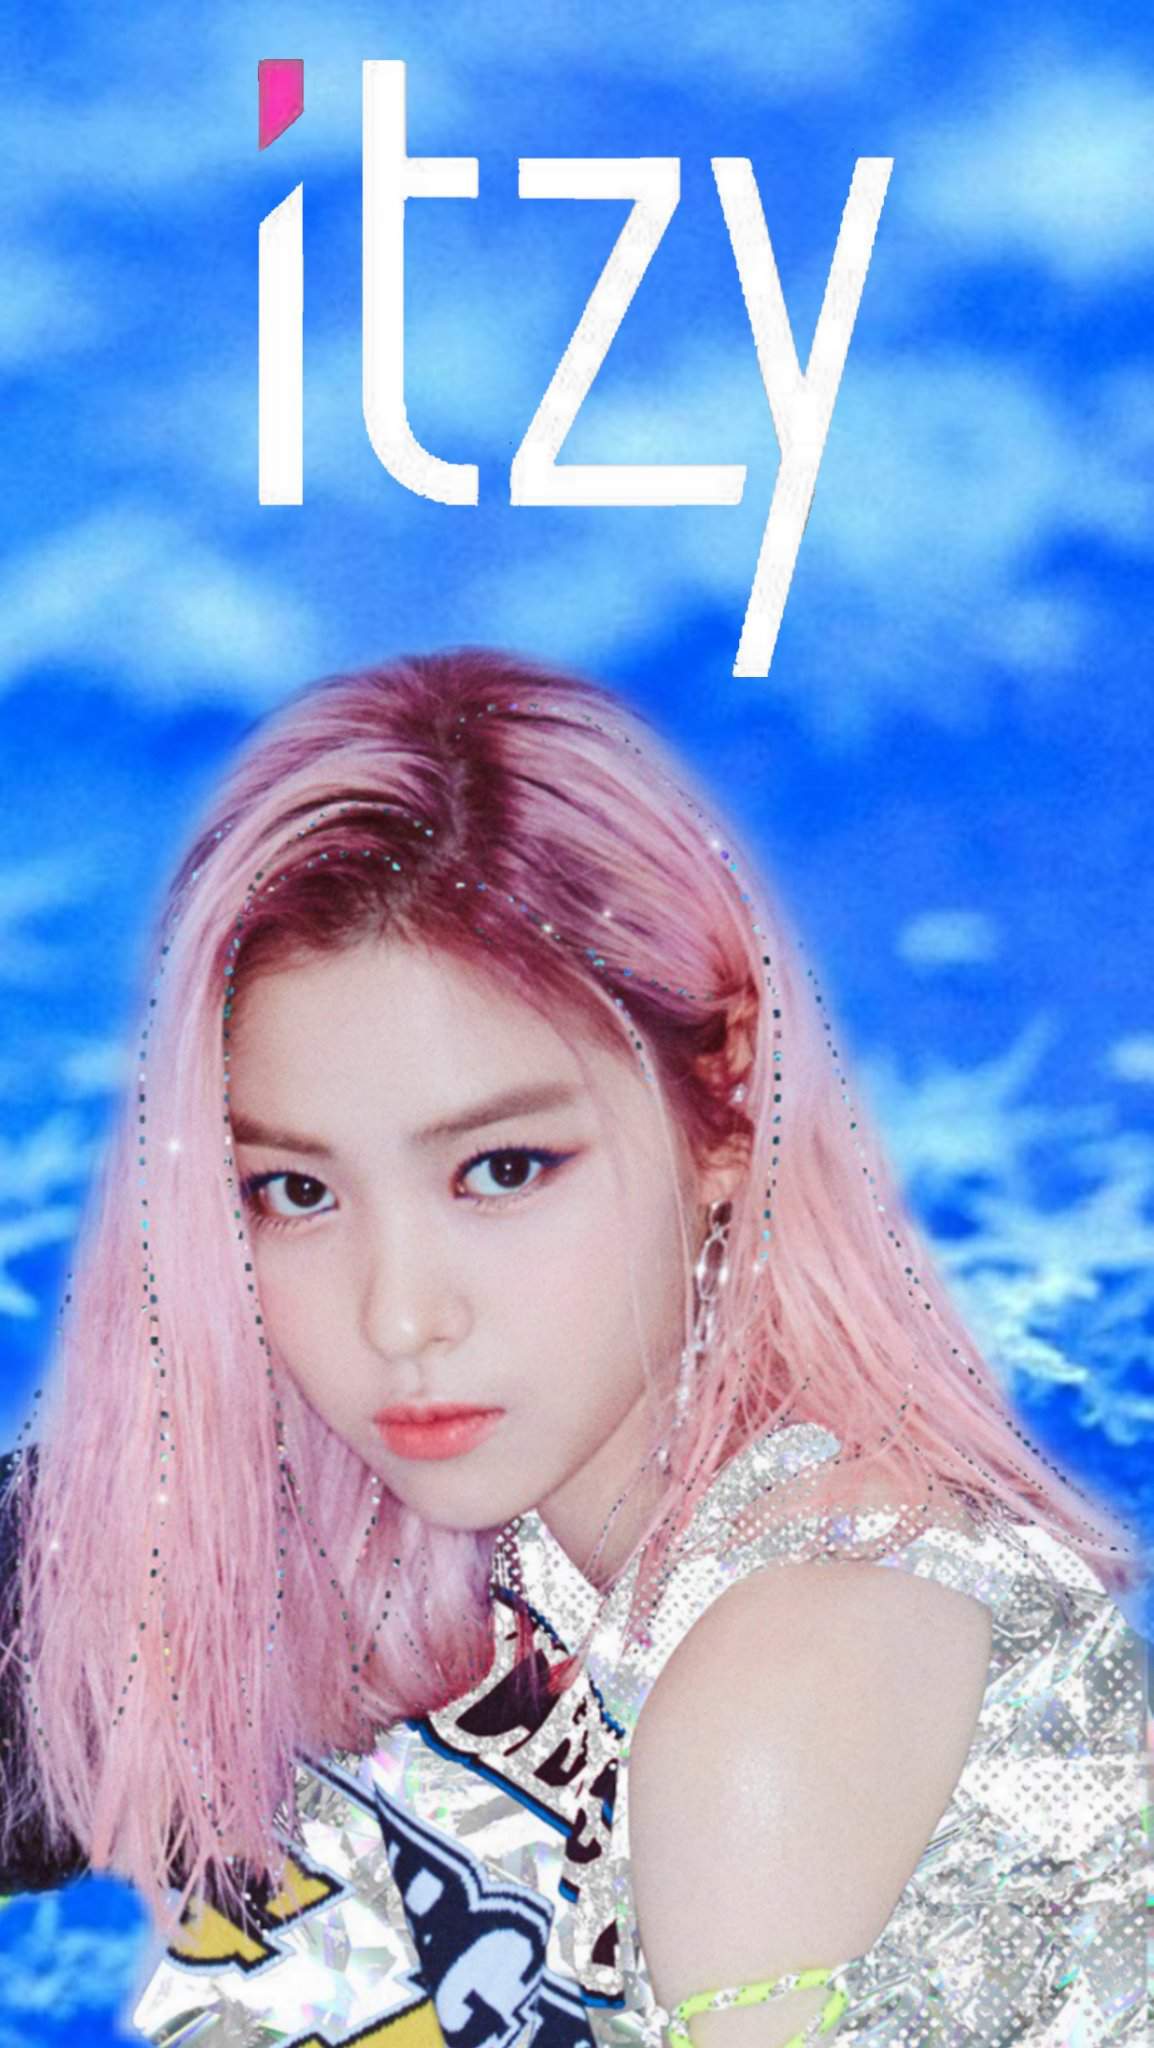 My favourite wallpaper so far. Can call me bias but she is definitely